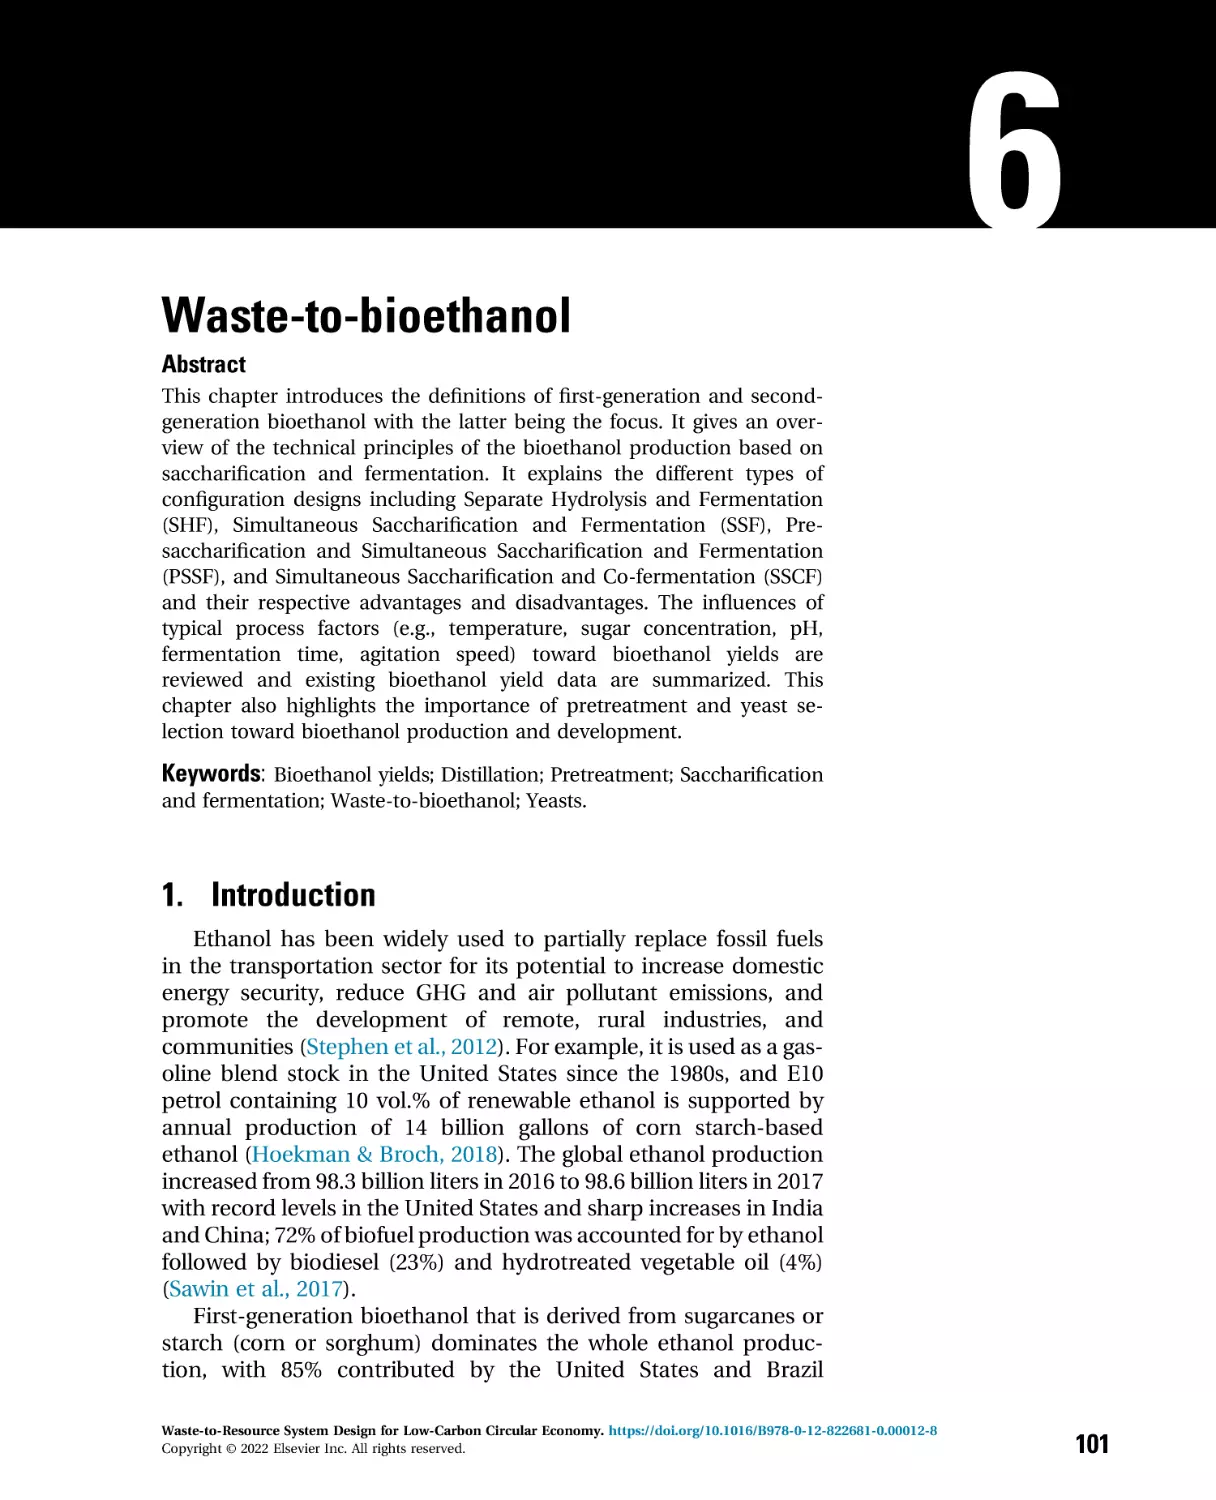 6 - Waste-to-bioethanol
1. Introduction